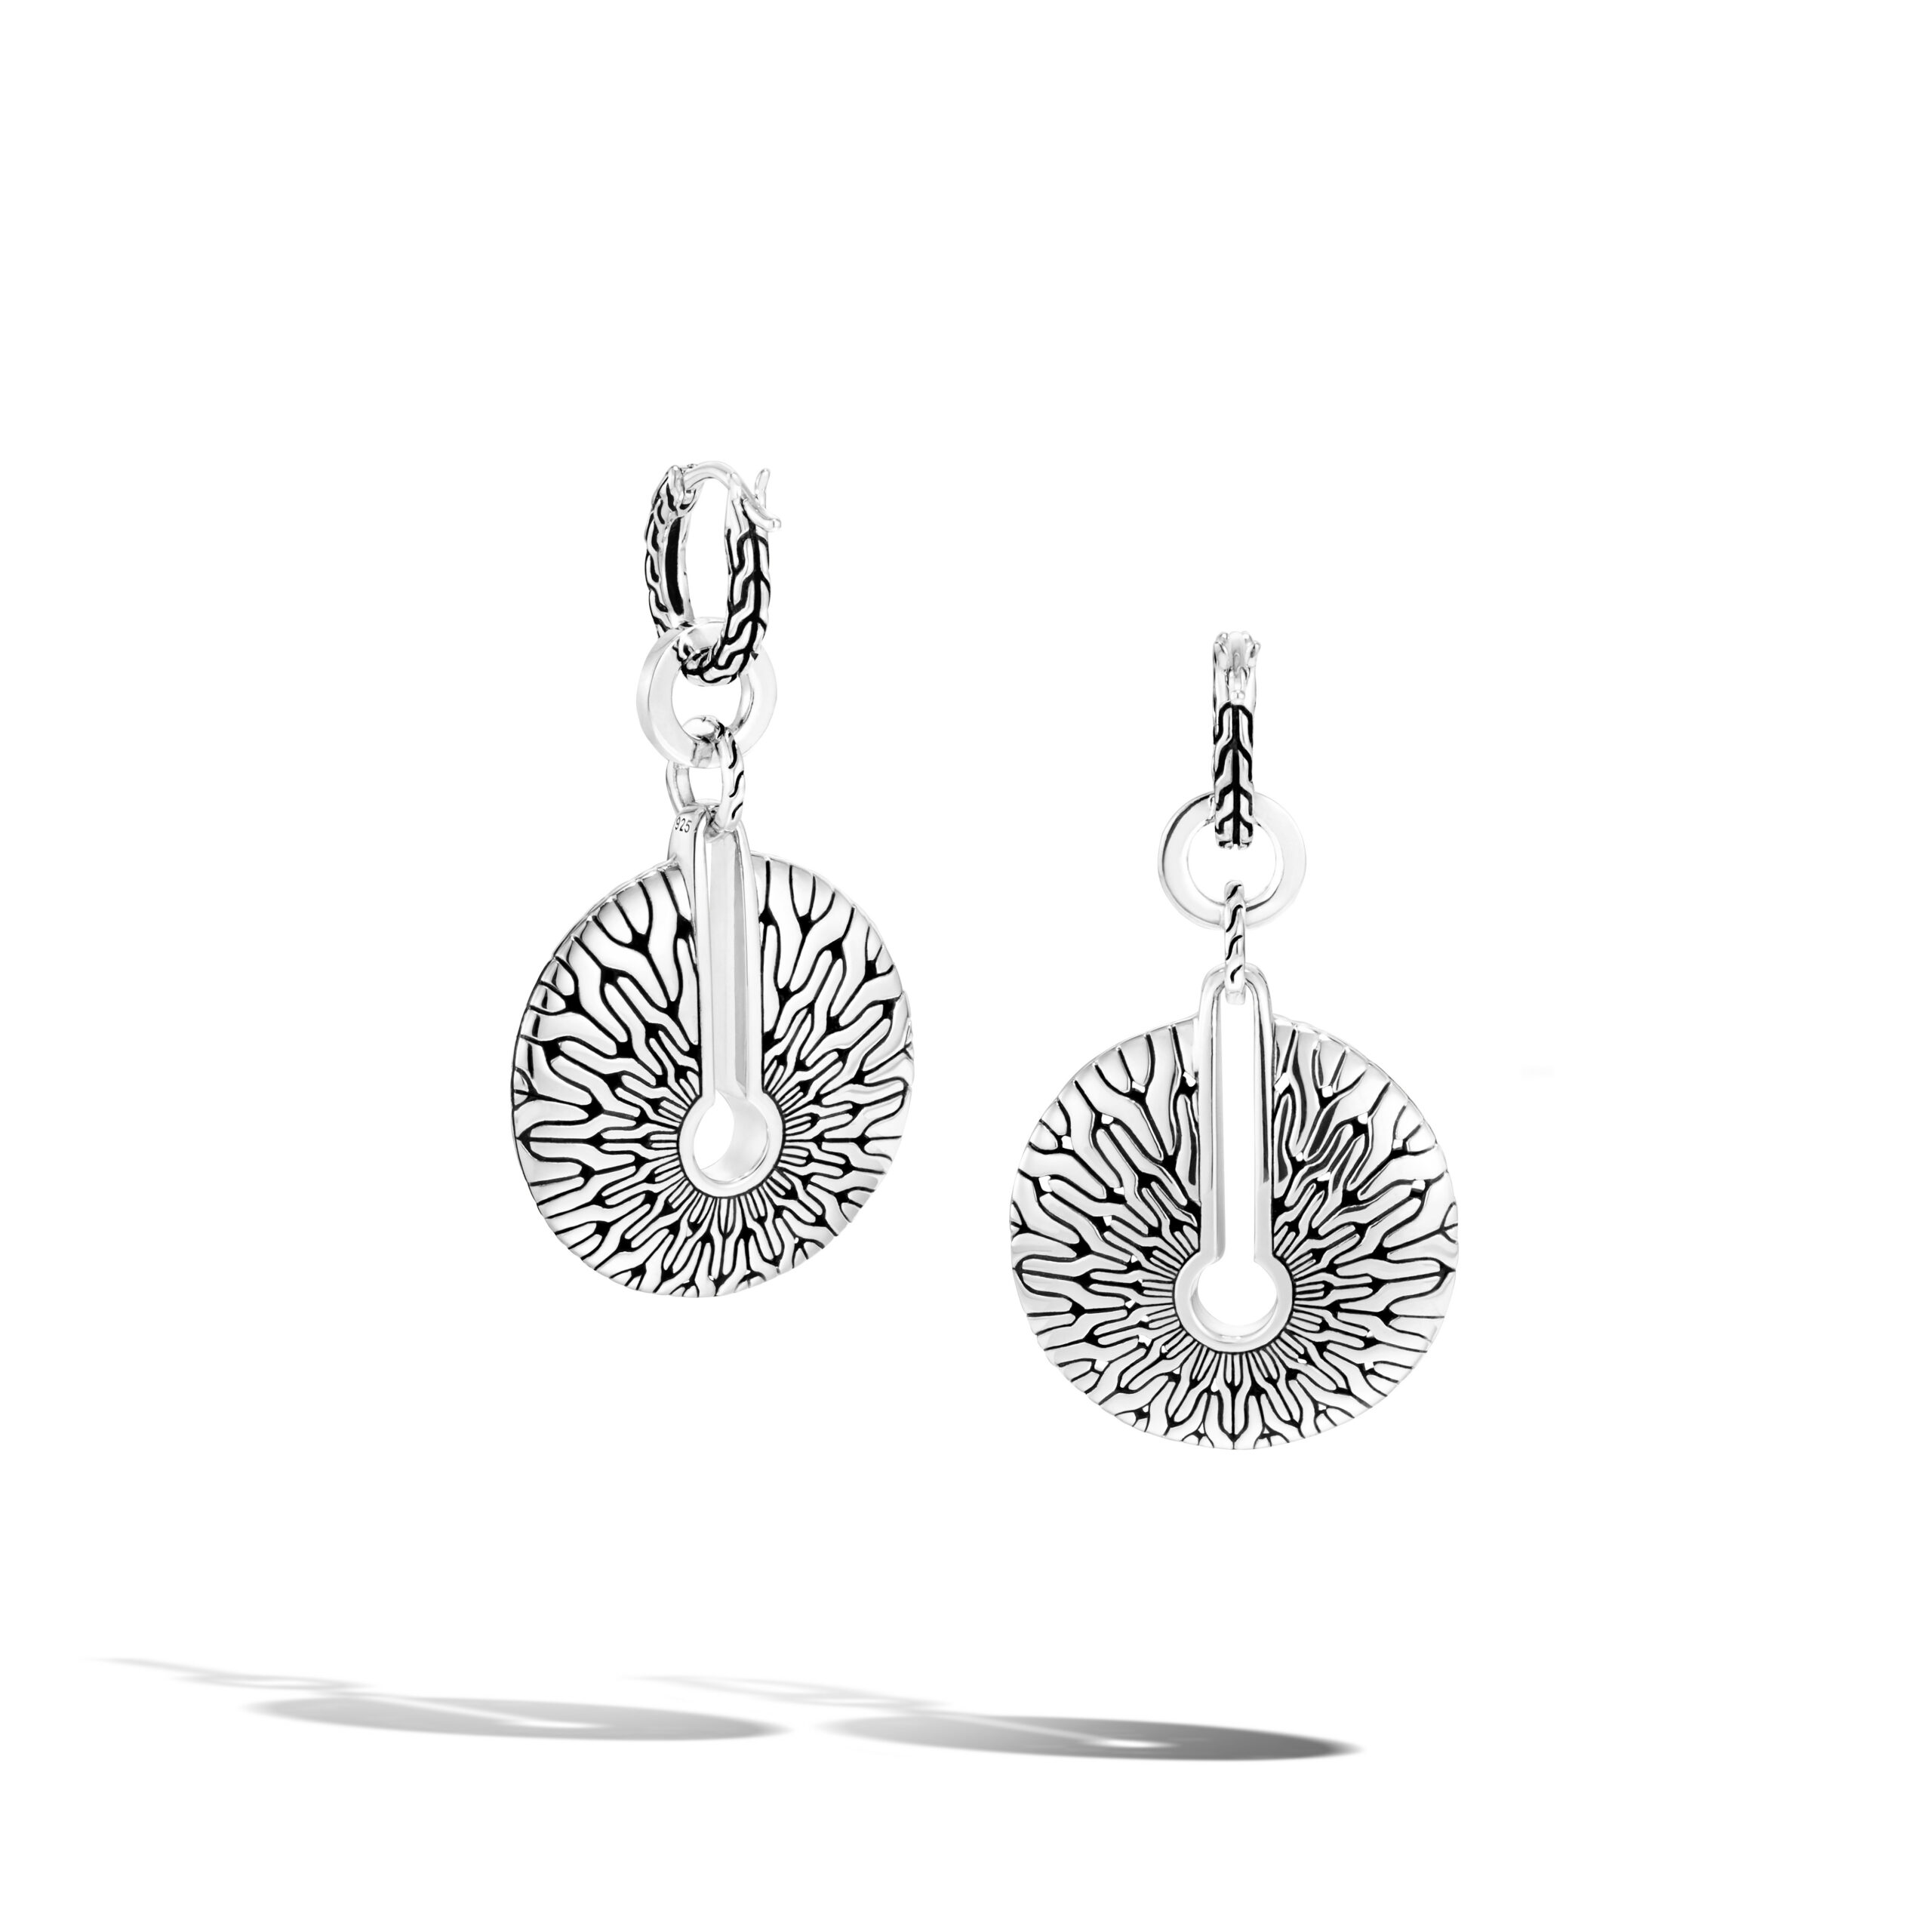 This pair of earrings by John Hardy is crafted from sterling silver and features a classic chain pattern.